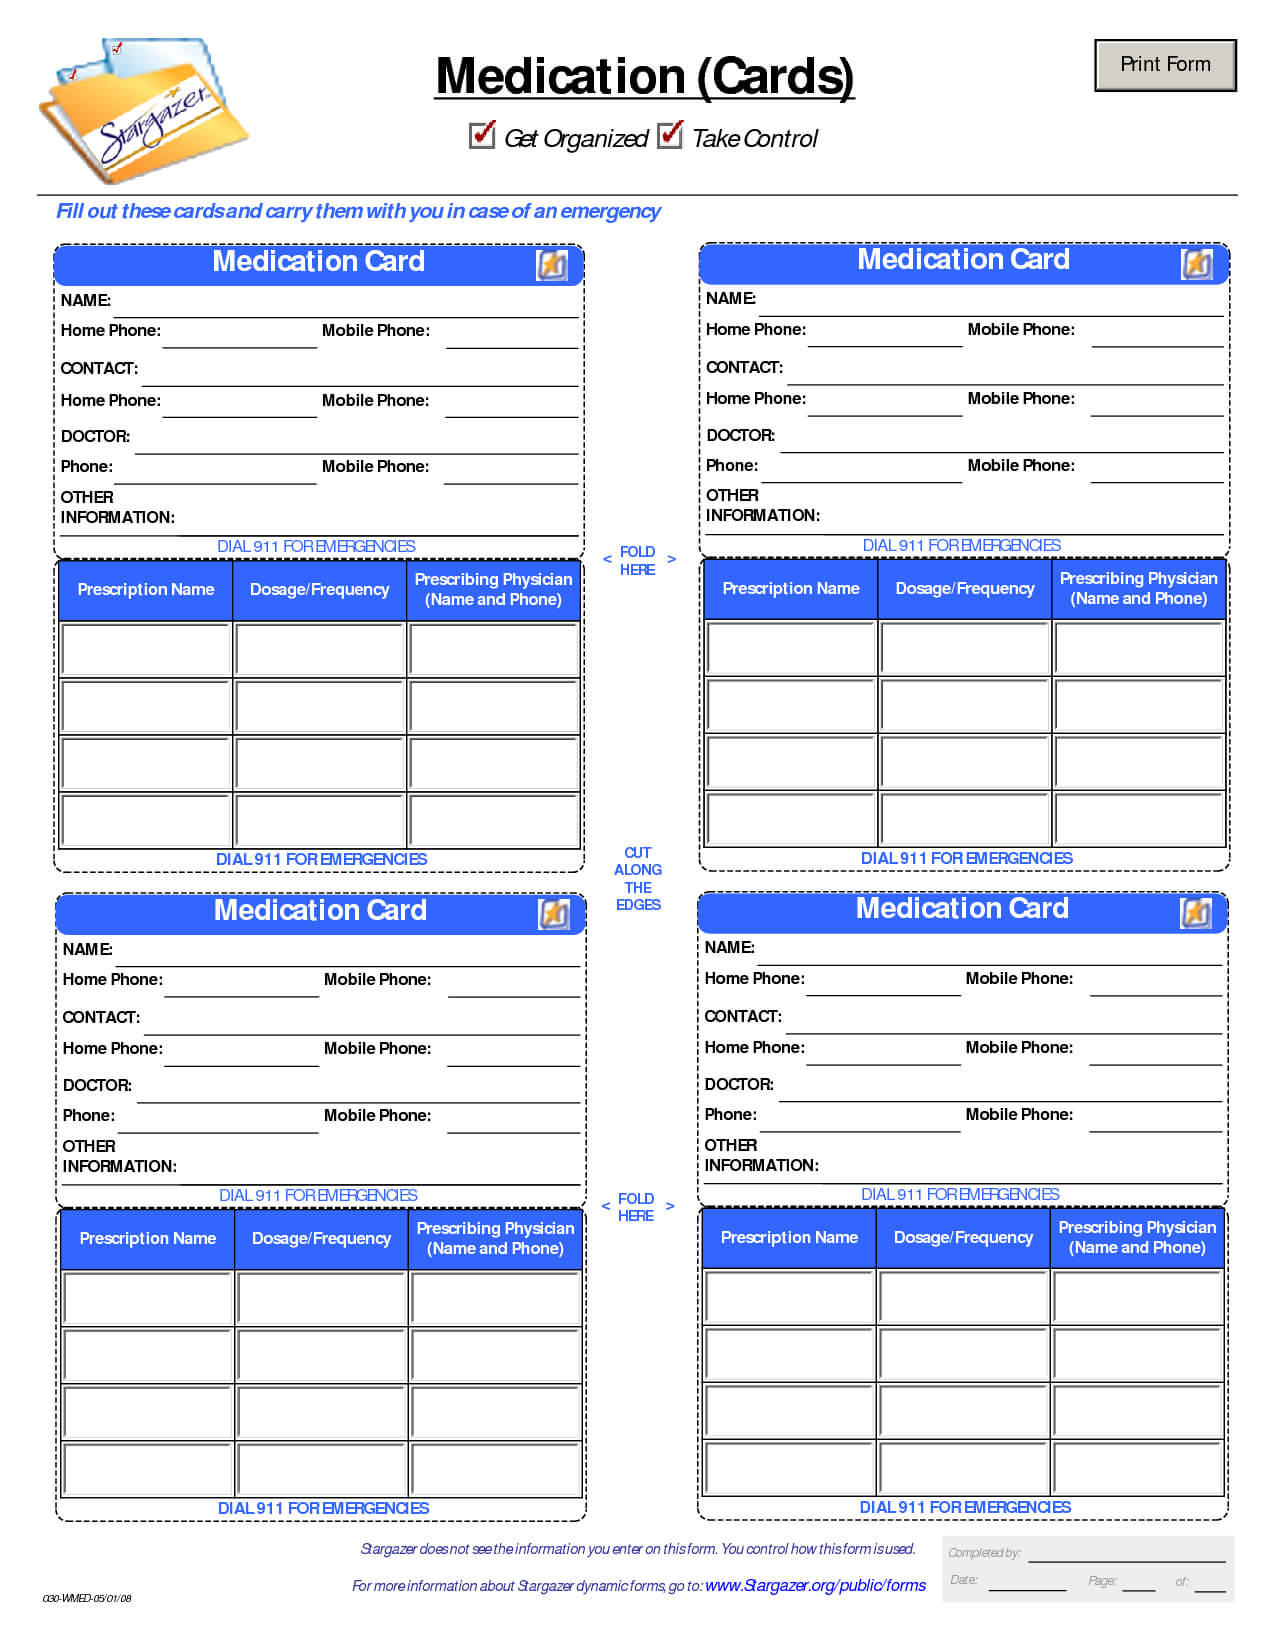 Patient Medication Card Template | Medication List, Medical Inside Medication Card Template